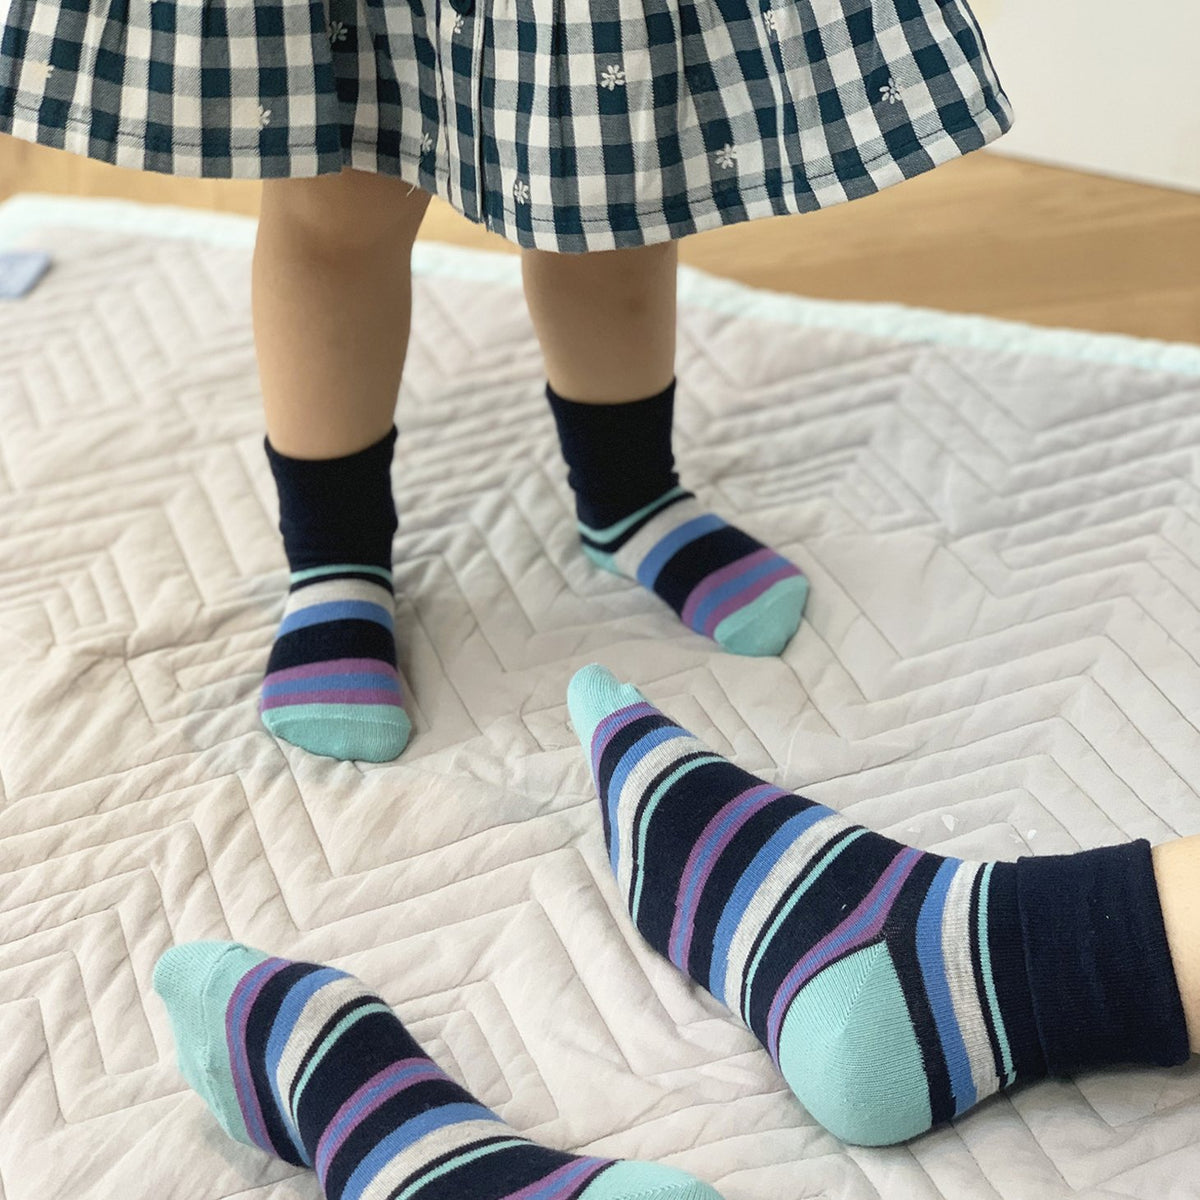 Baby and Child's Mini Me Matching Socks in Navy Stripe